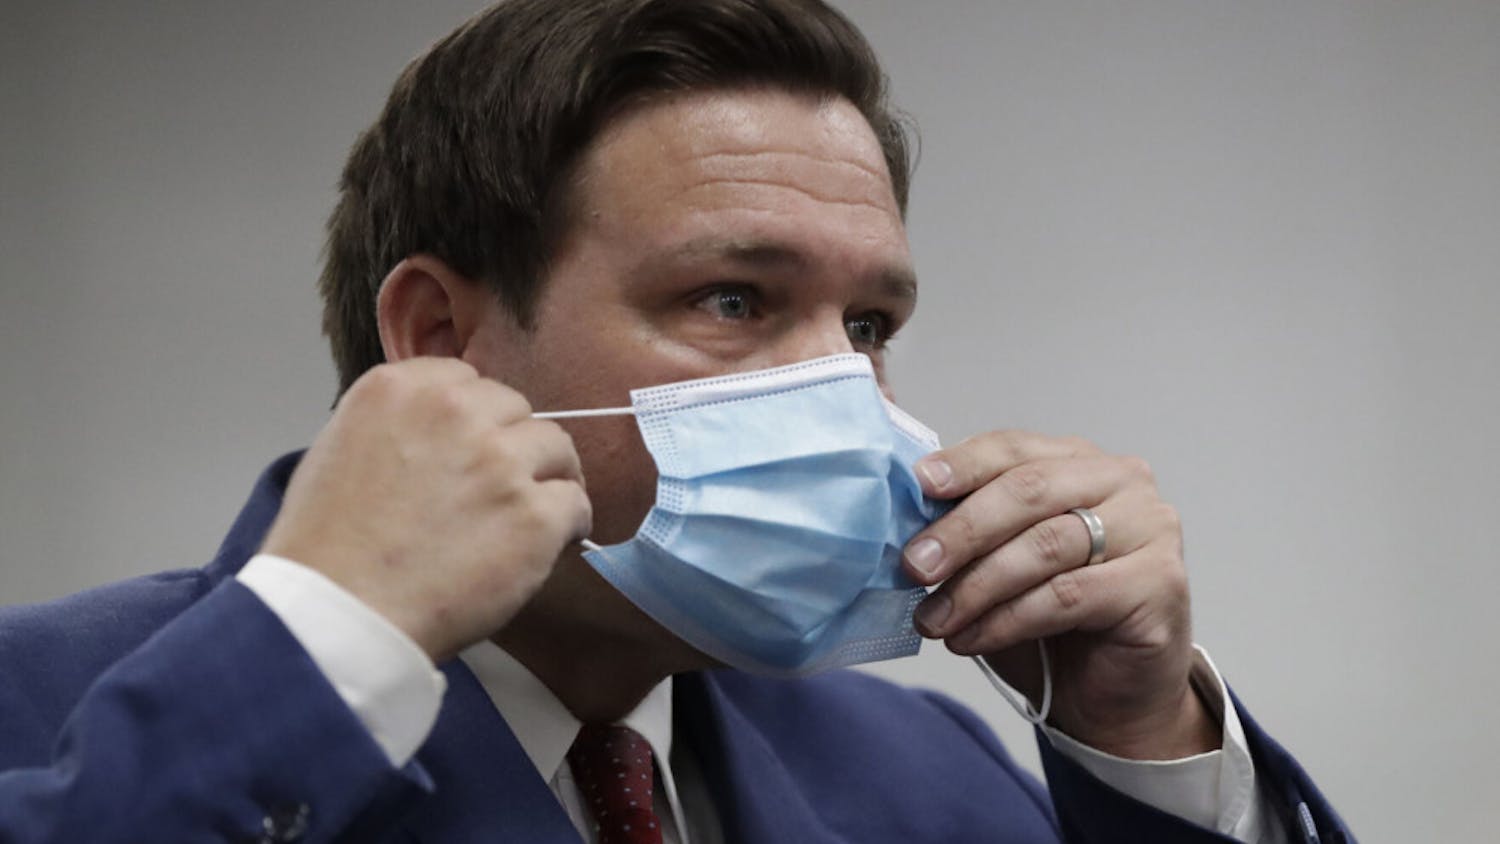 Florida Gov. Ron DeSantis puts on his mask as he leaves a news conference at Jackson Memorial Hospital, Monday, July 13, 2020, in Miami. DeSantis acknowledged Monday that the new coronavirus is spreading and urged people to take precautions such as wearing masks in public places, social distancing and avoiding crowds. (AP Photo/Wilfredo Lee)